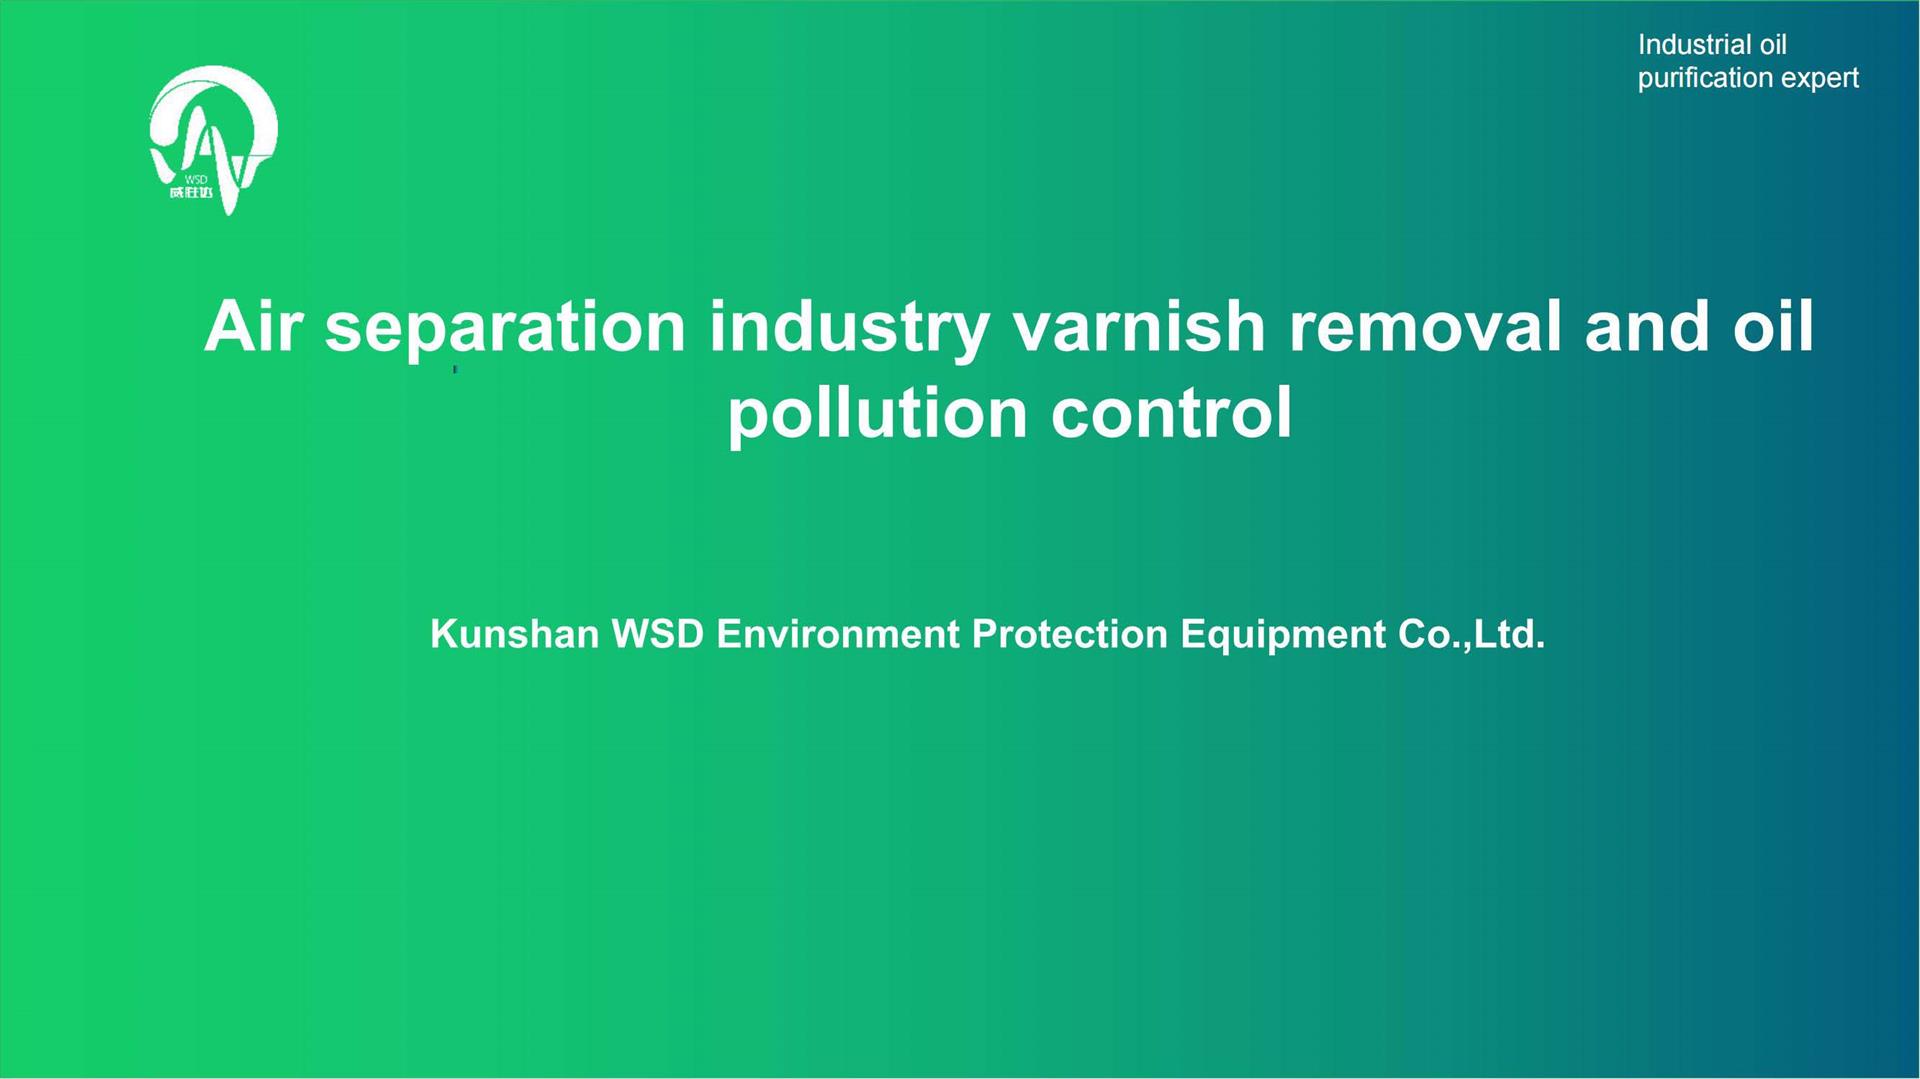 WSD-Air separation varnish removal and oil pollution control 2022